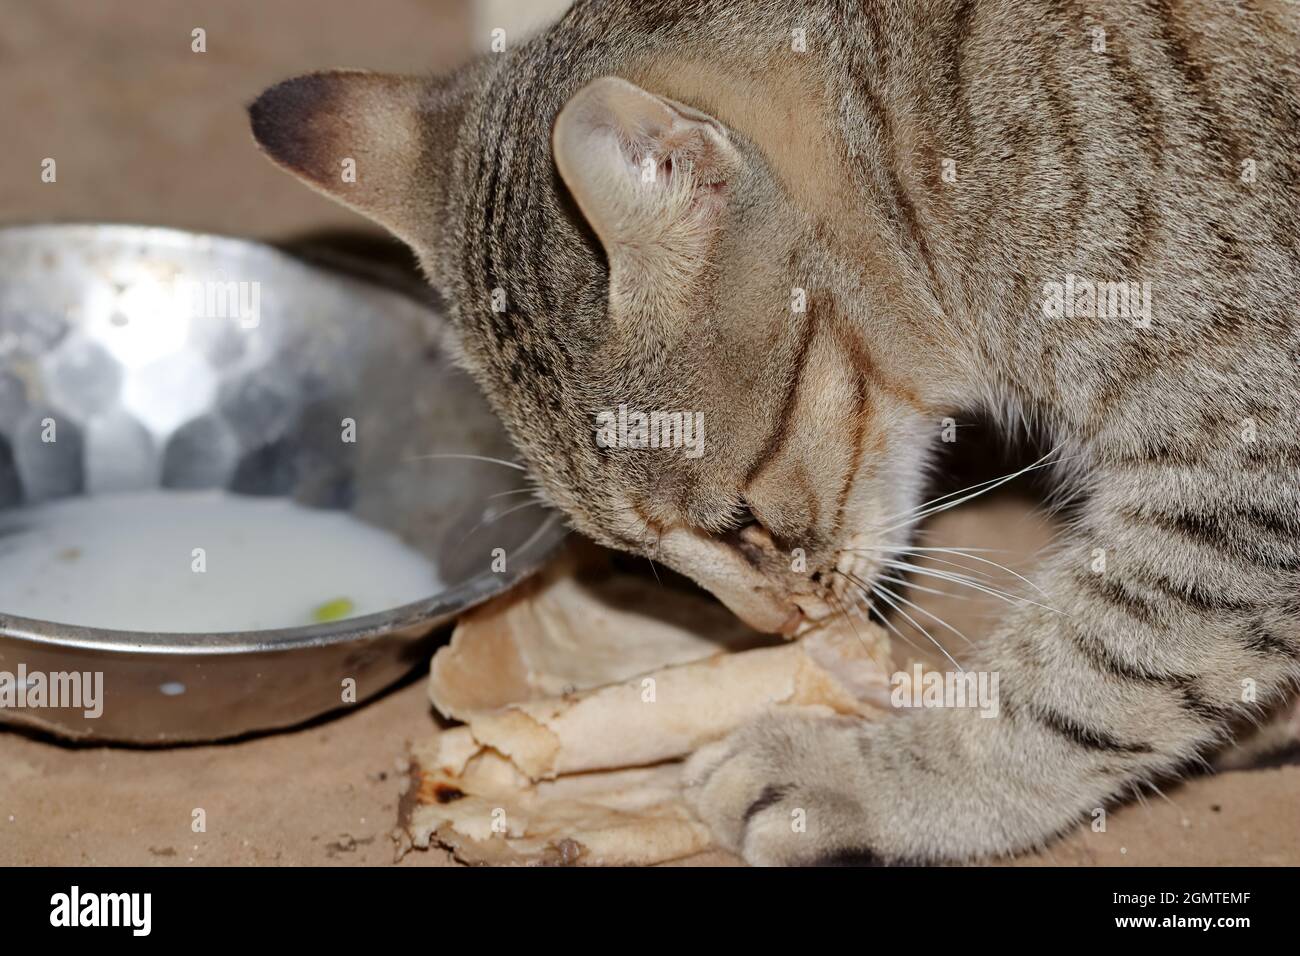 Close-up of A pet tabby cat eating and holding bread with its paw Stock Photo